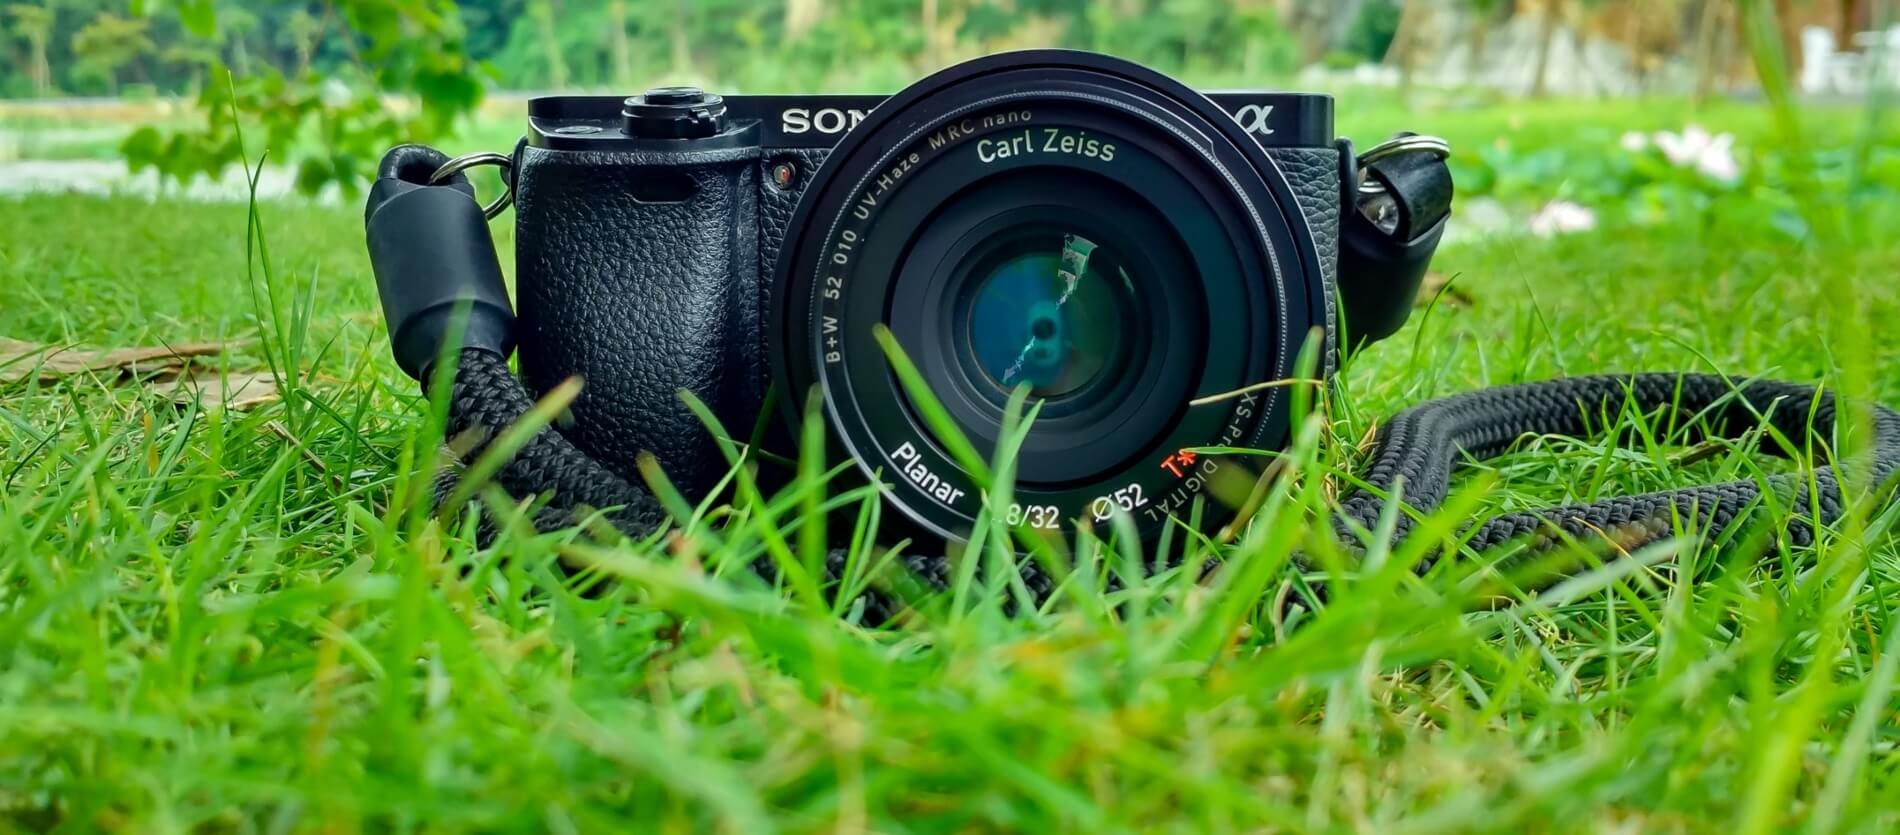 Black Sony Dslr Camera on Green Grass in Front of Brown and Green Mountain (Fox|Pexels)